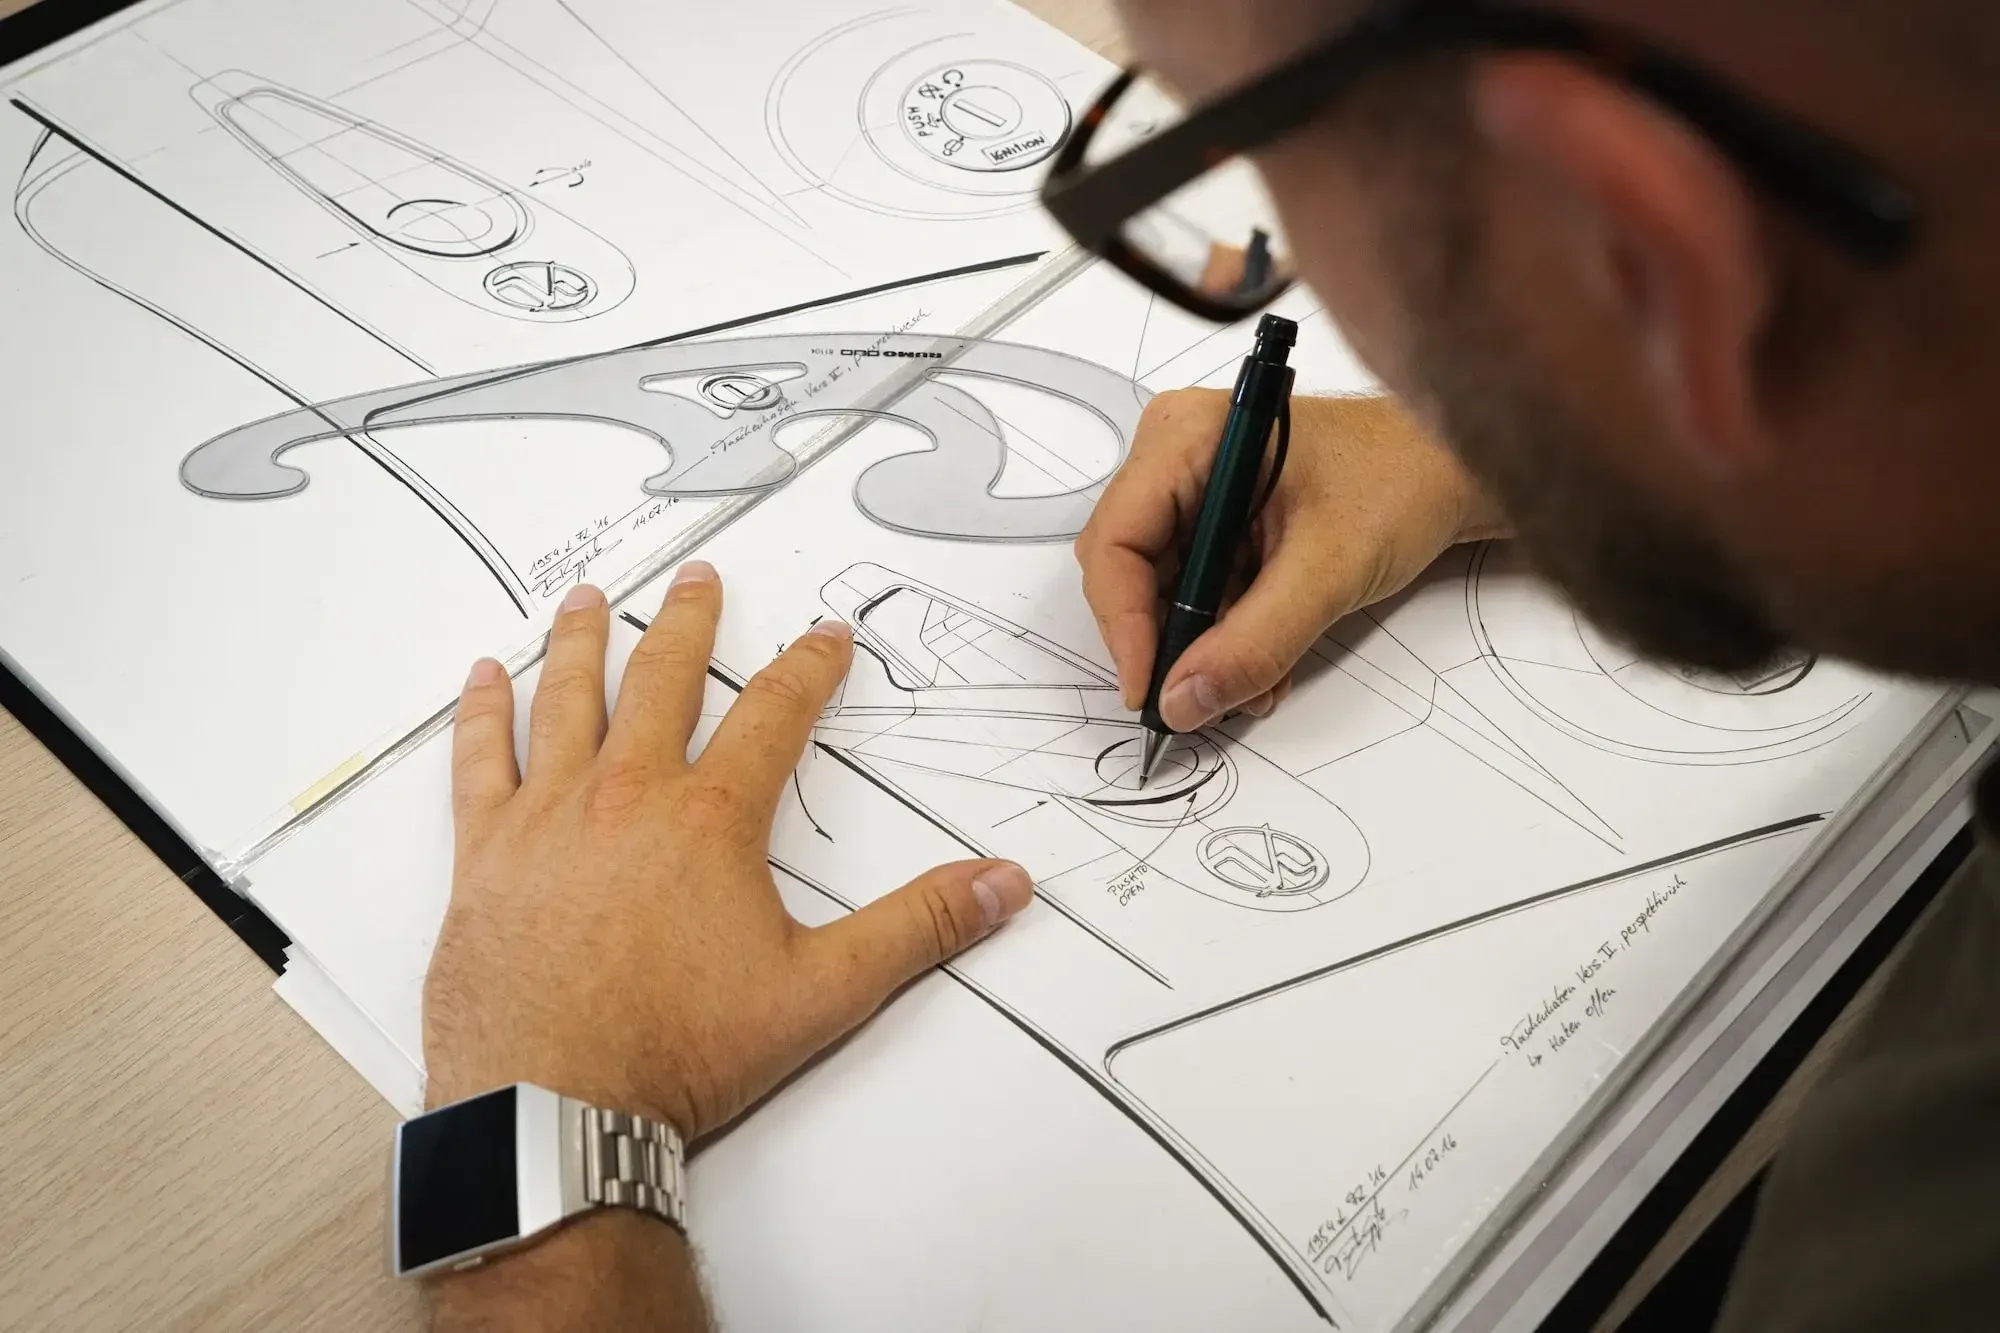 Man with silver watch and black frame using tools for sketching a product.